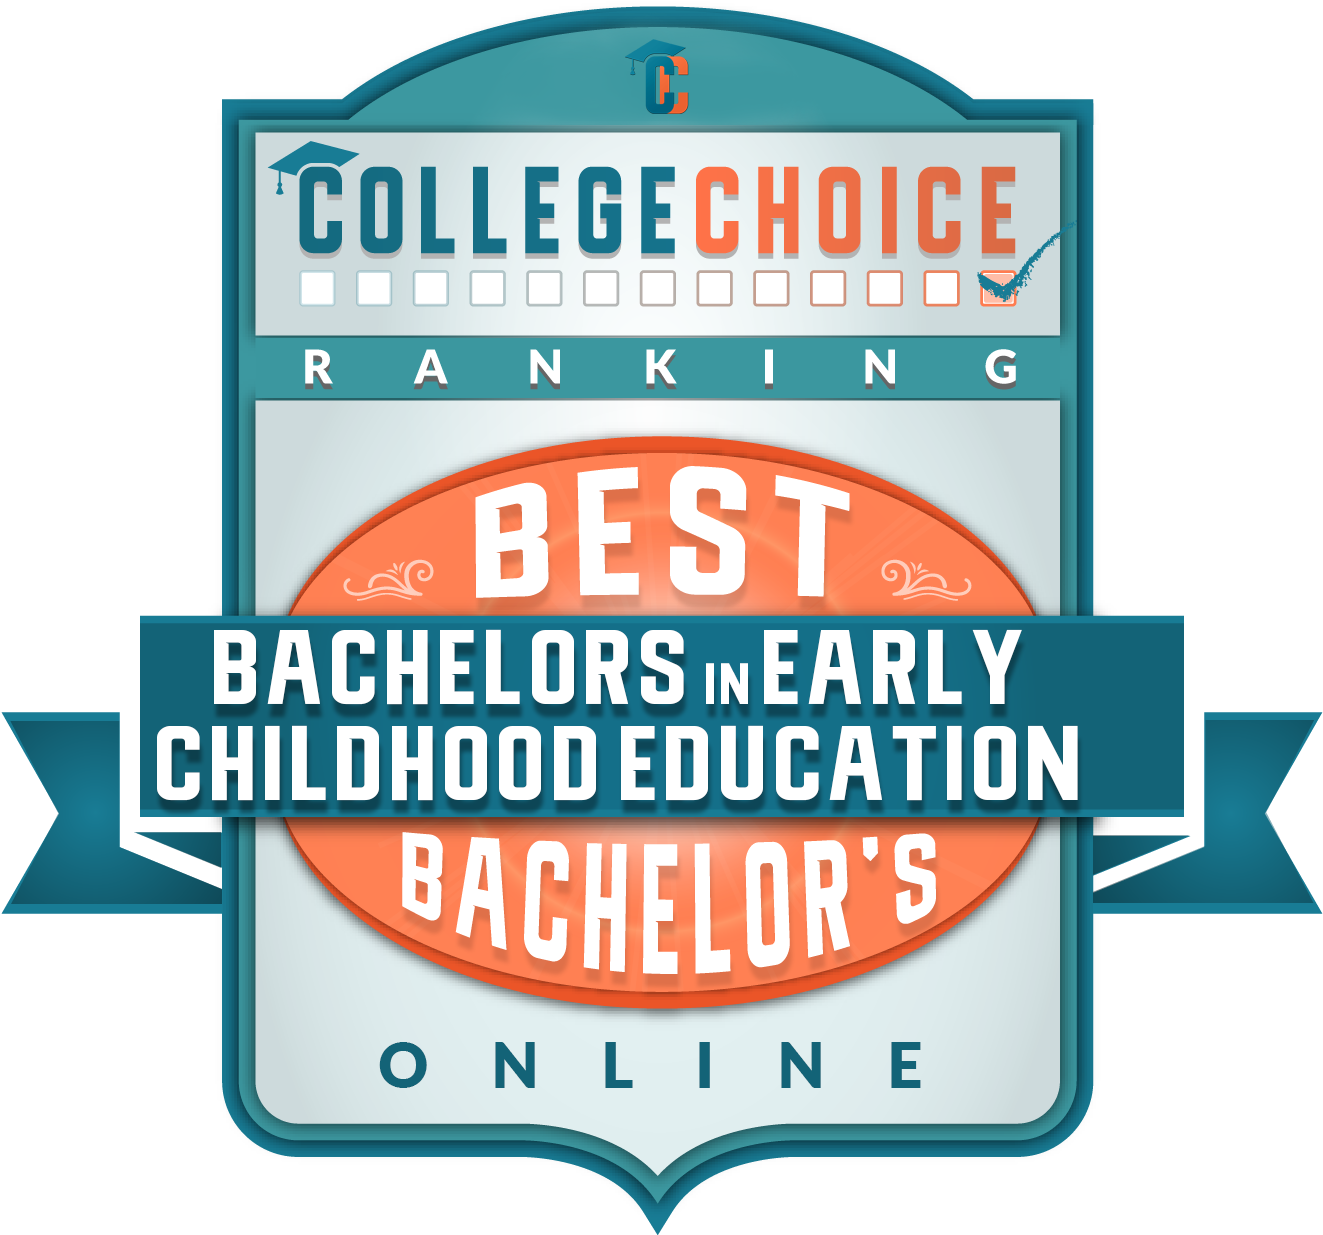 Collegechoice Best Bachelors In Early Childhood Education - Georgia Institute Of Technology Nuclear Engineering (1400x1237)